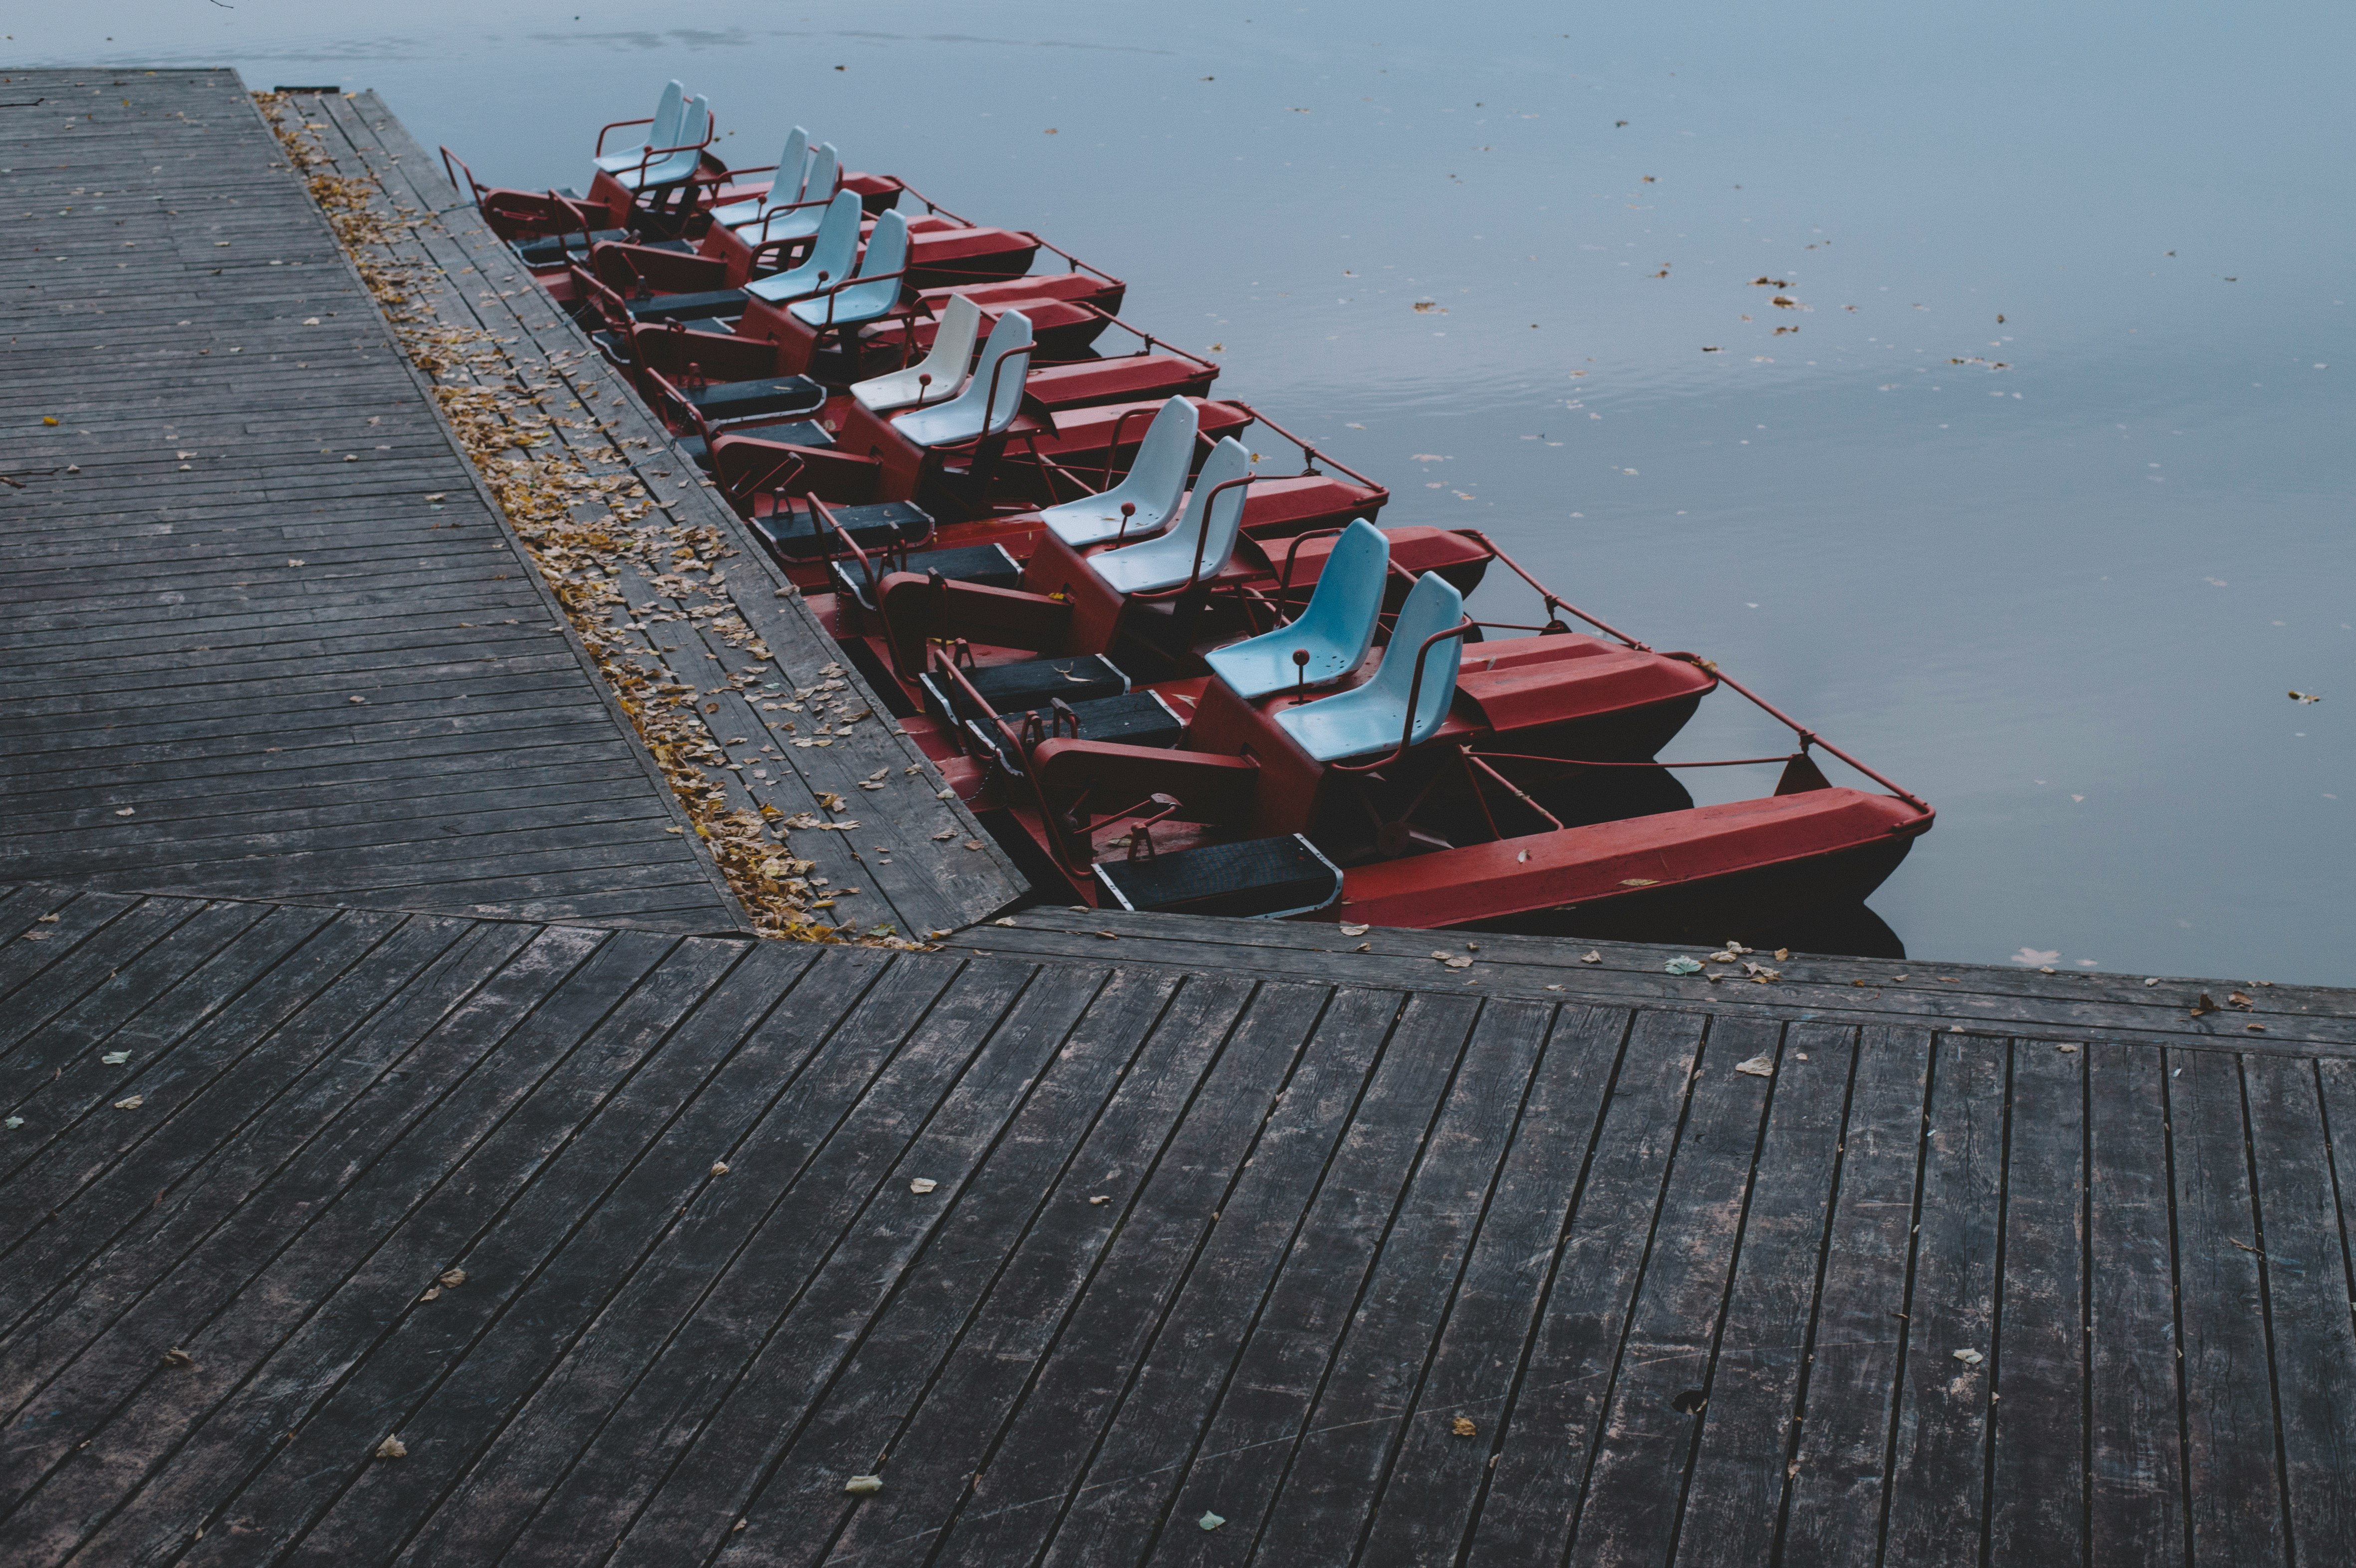 red and black wooden boat on sea dock during daytime